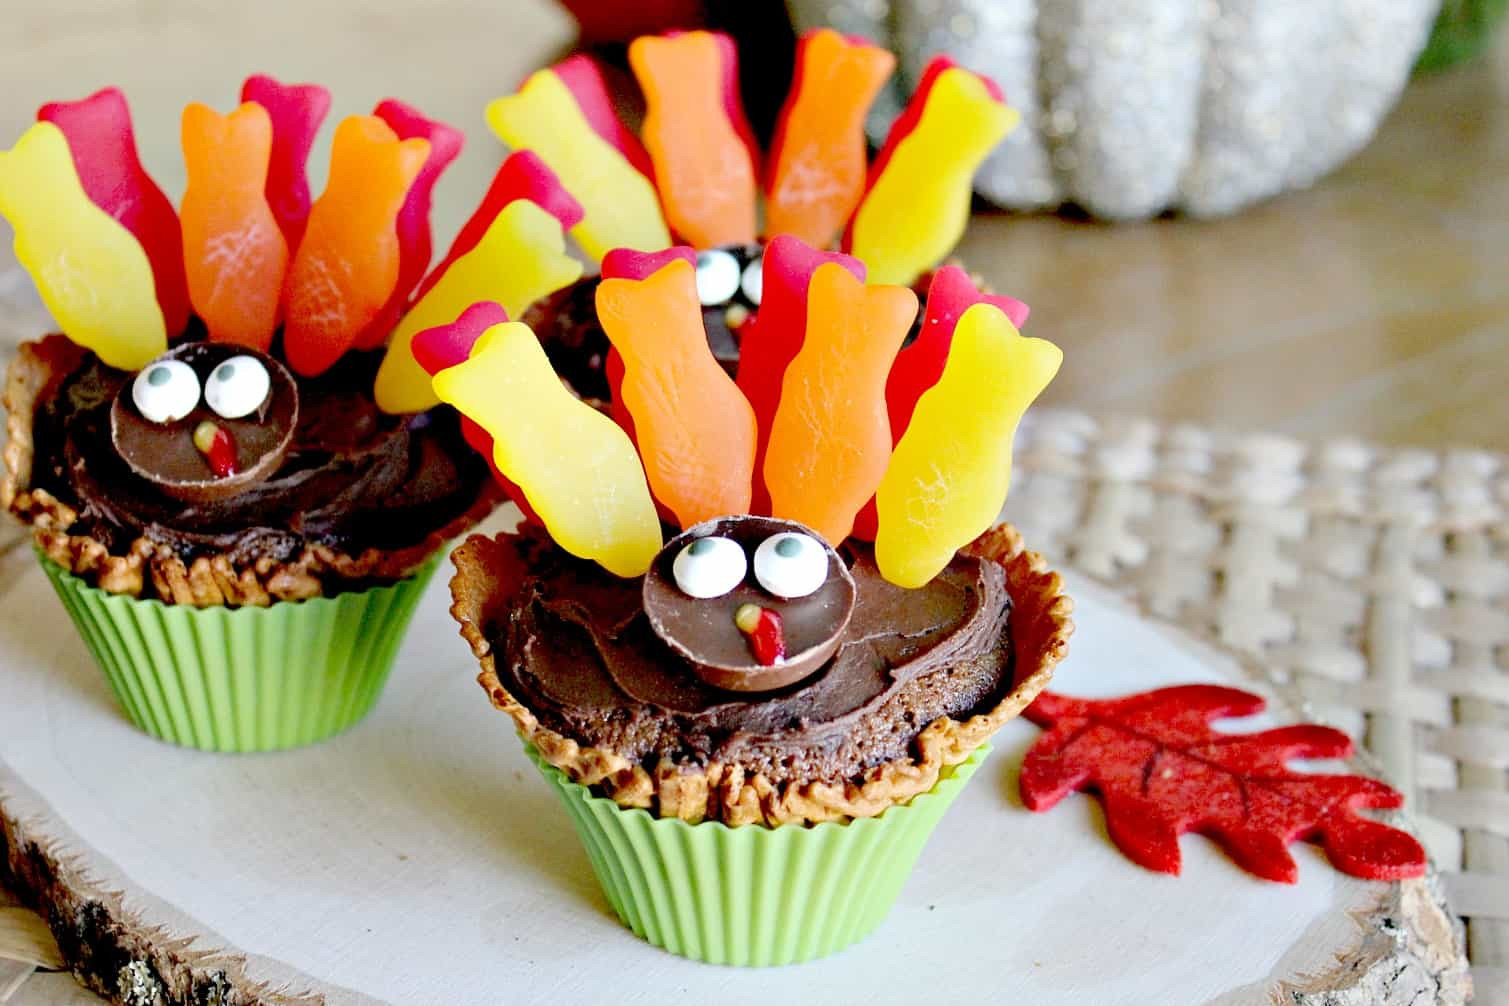 DIY Thanksgiving Crafts For Toddlers
 Festive Fun 12 Easy Thanksgiving Crafts for Kids